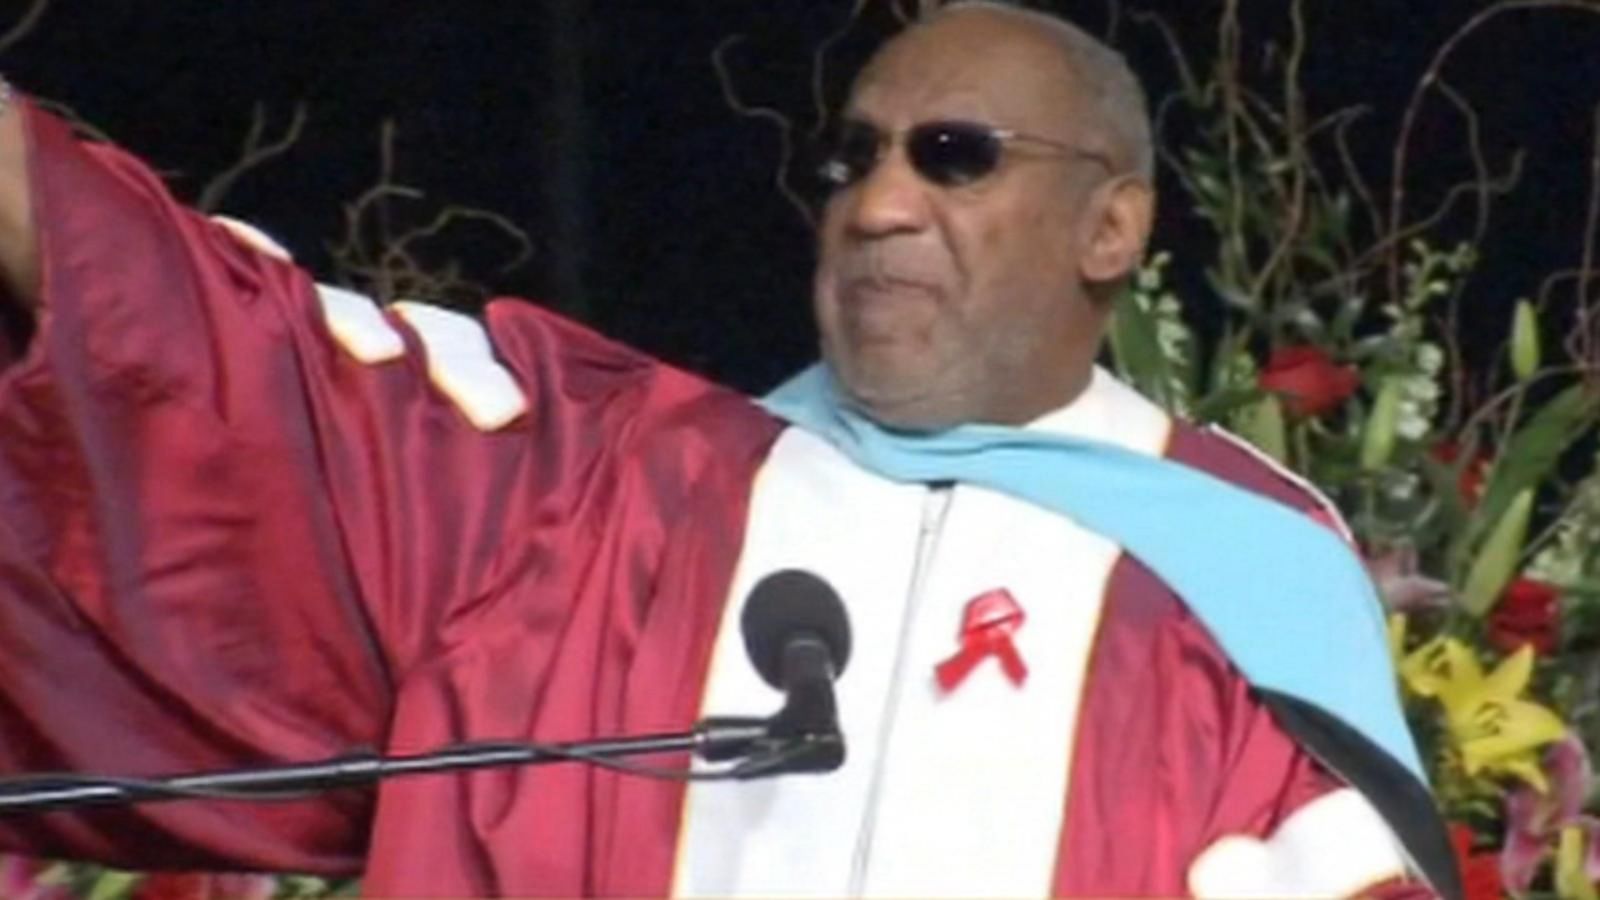 Bill Cosby Sex Assault Allegations Comedian Resigns As Trustee Of Temple University Good